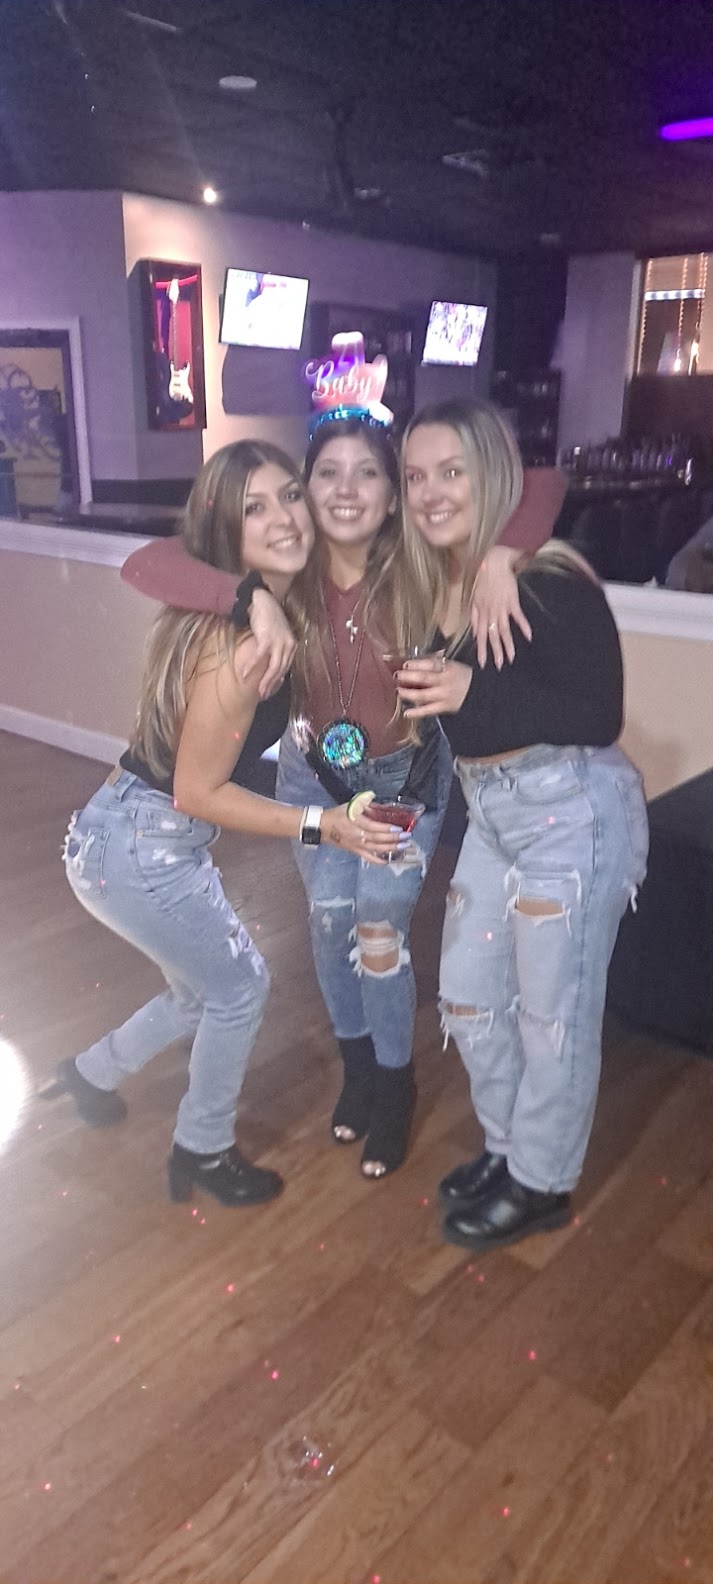 Three women posing for a picture in a club.